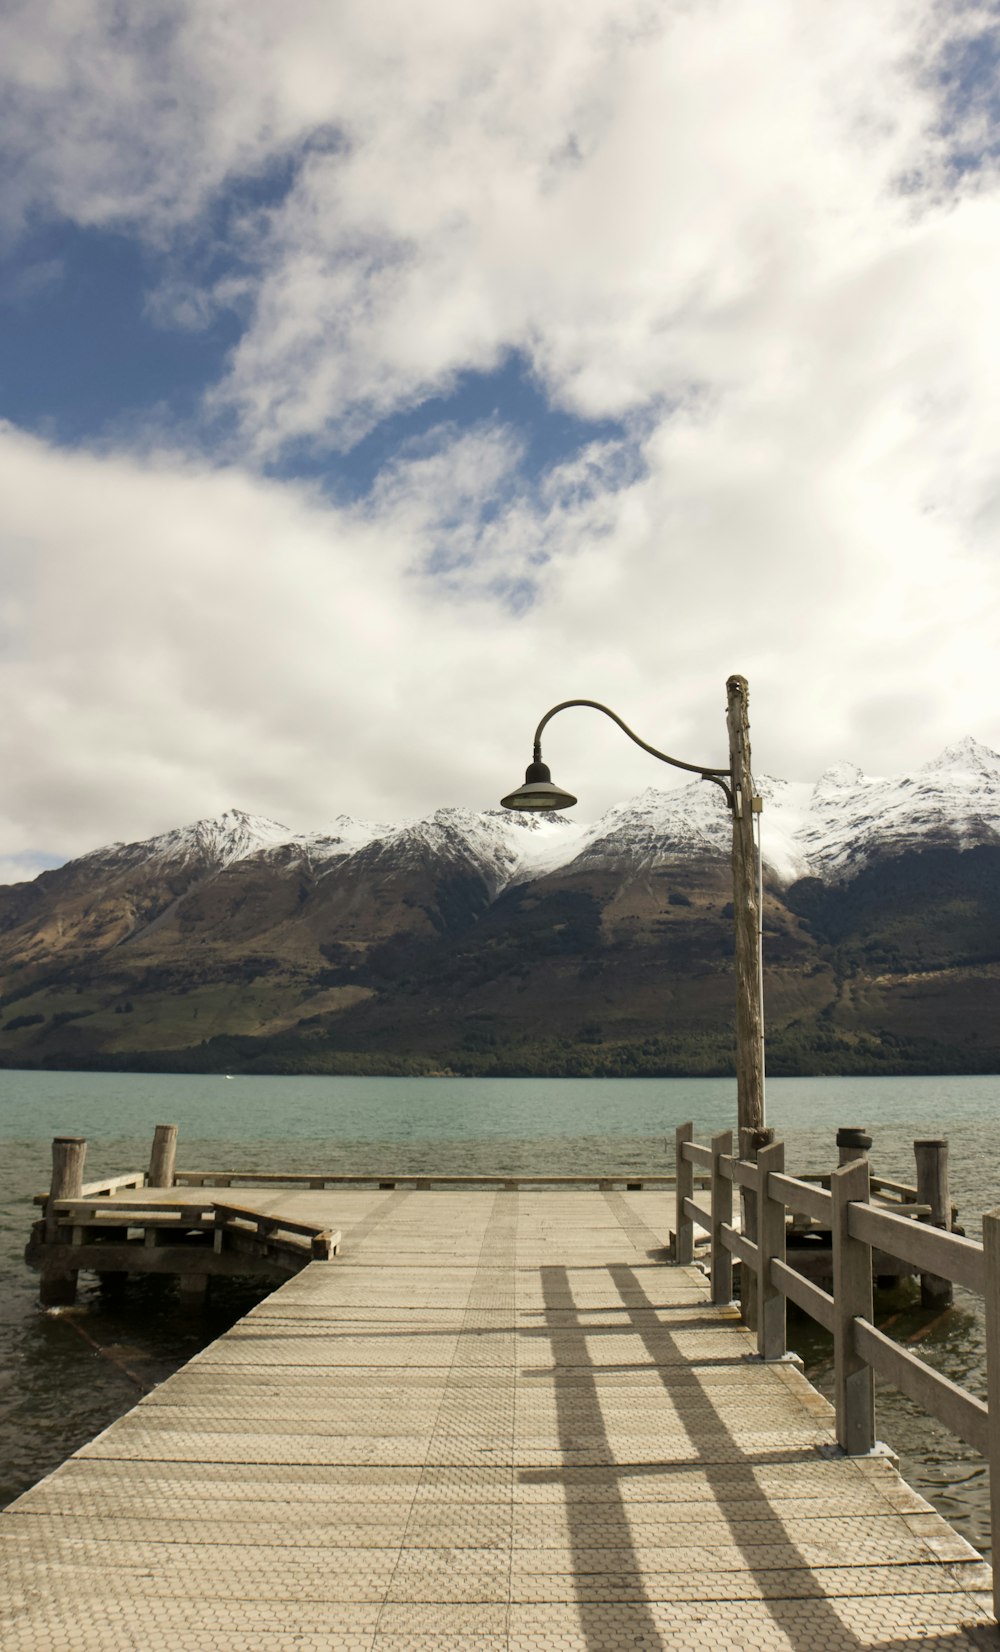 brown wooden dock near body of water and mountain under white clouds and blue sky during